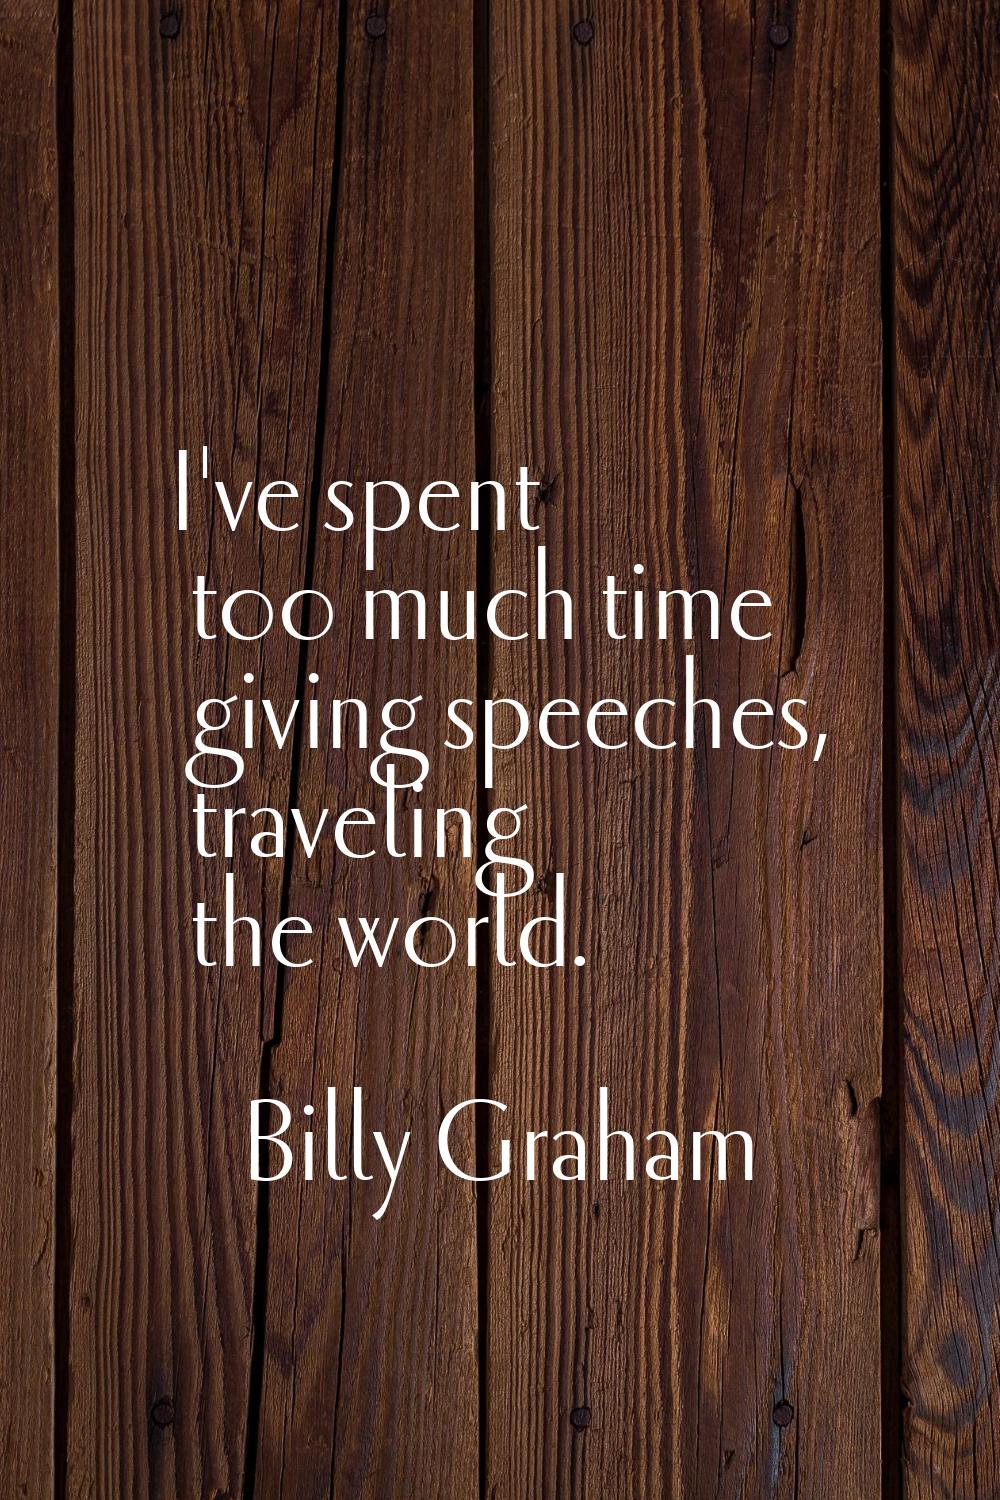 I've spent too much time giving speeches, traveling the world.